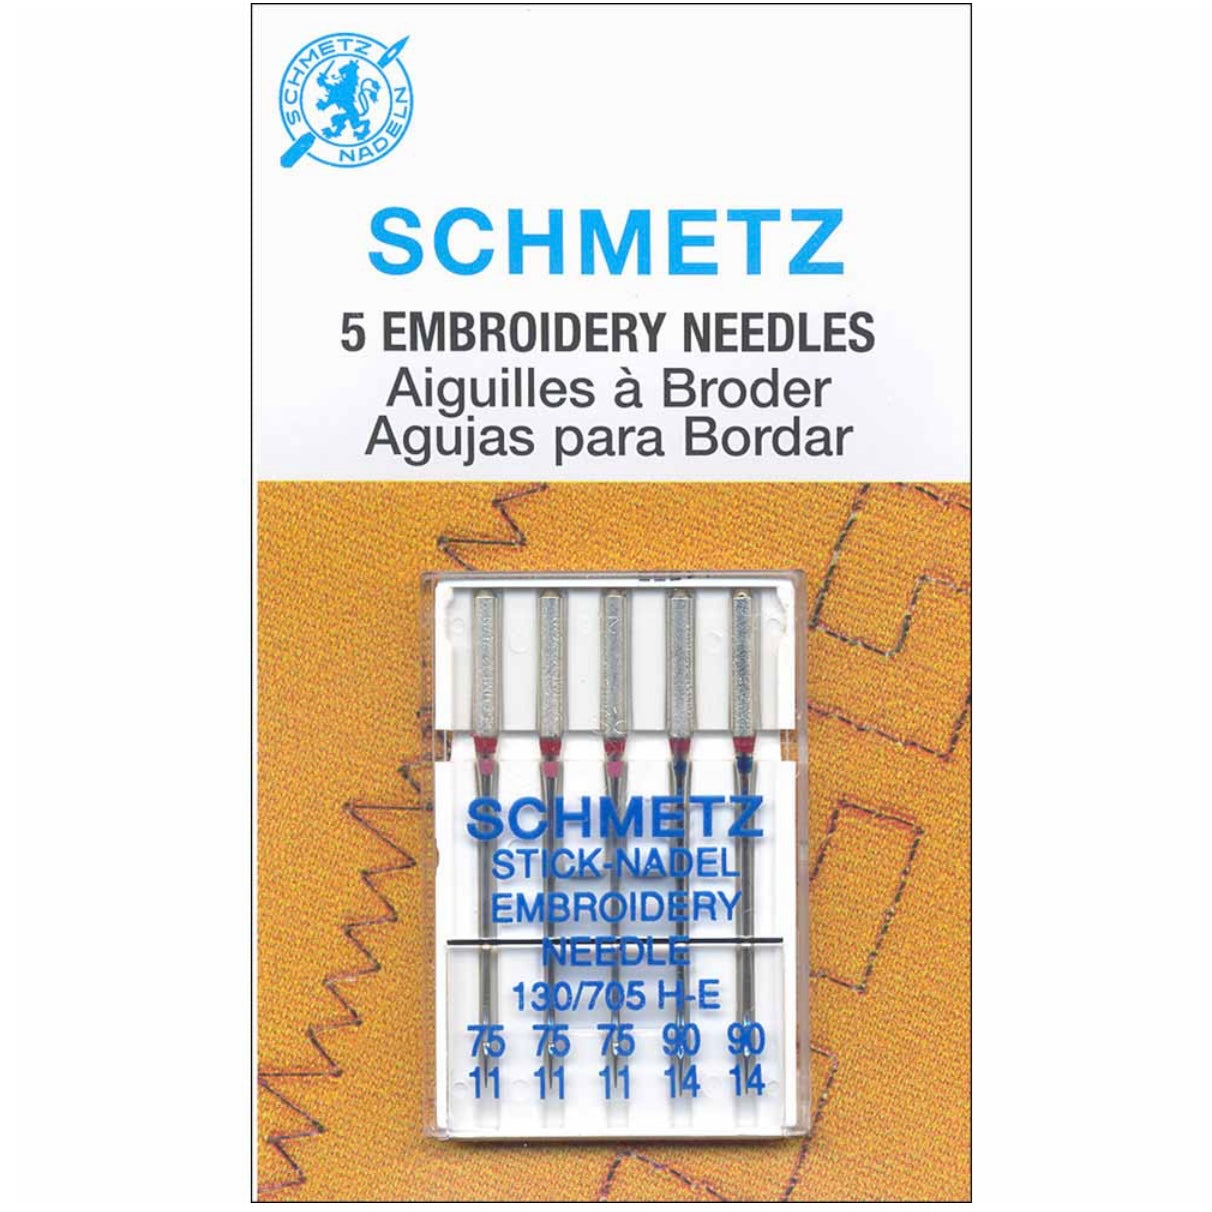 Embroidery Needles - Schmetz - Assorted Sizes- 5 Count